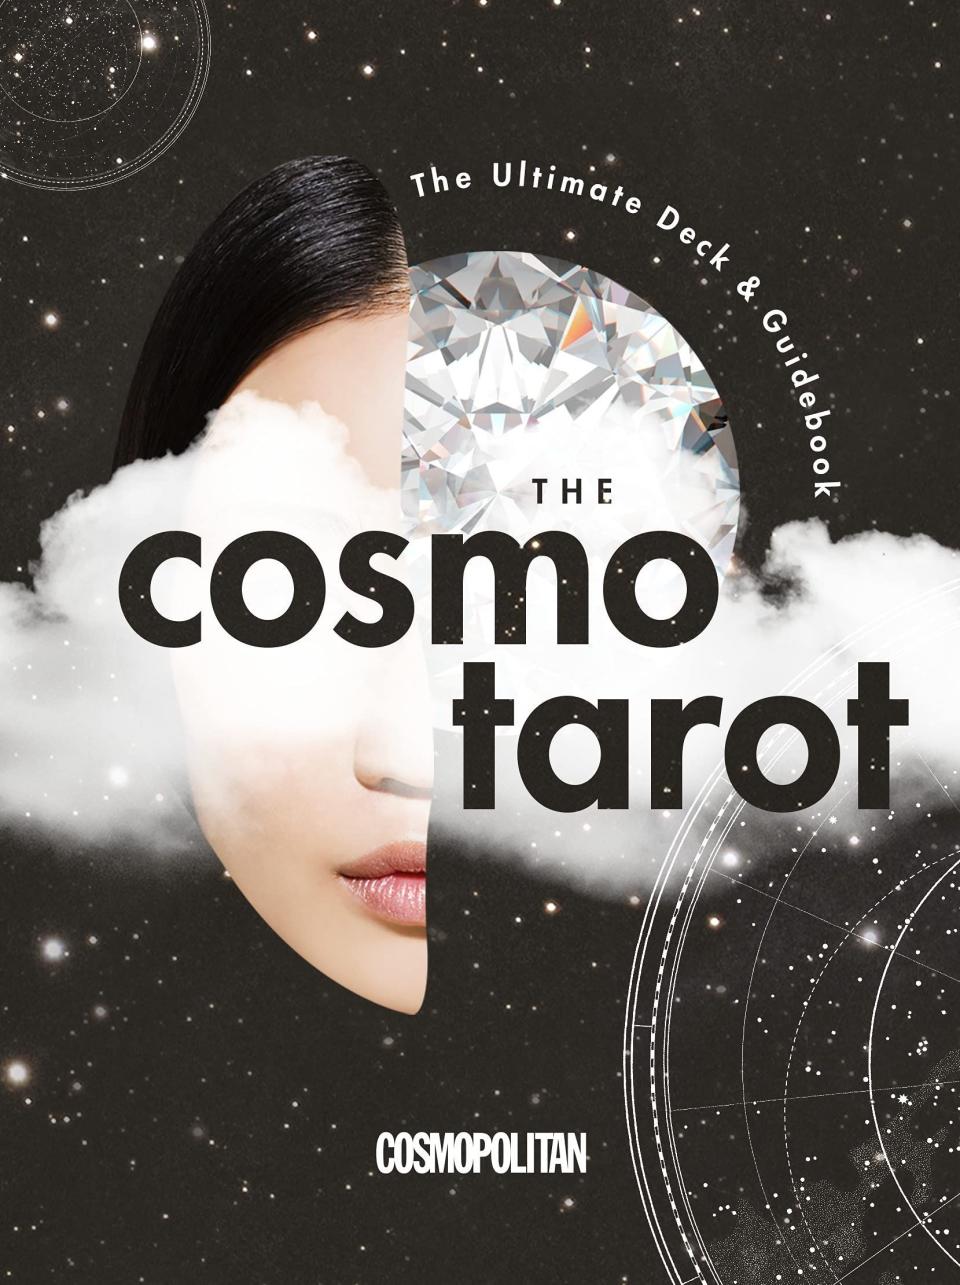 71) Hearst Home <i>The Cosmo Tarot: The Ultimate Deck and Guidebook</i>